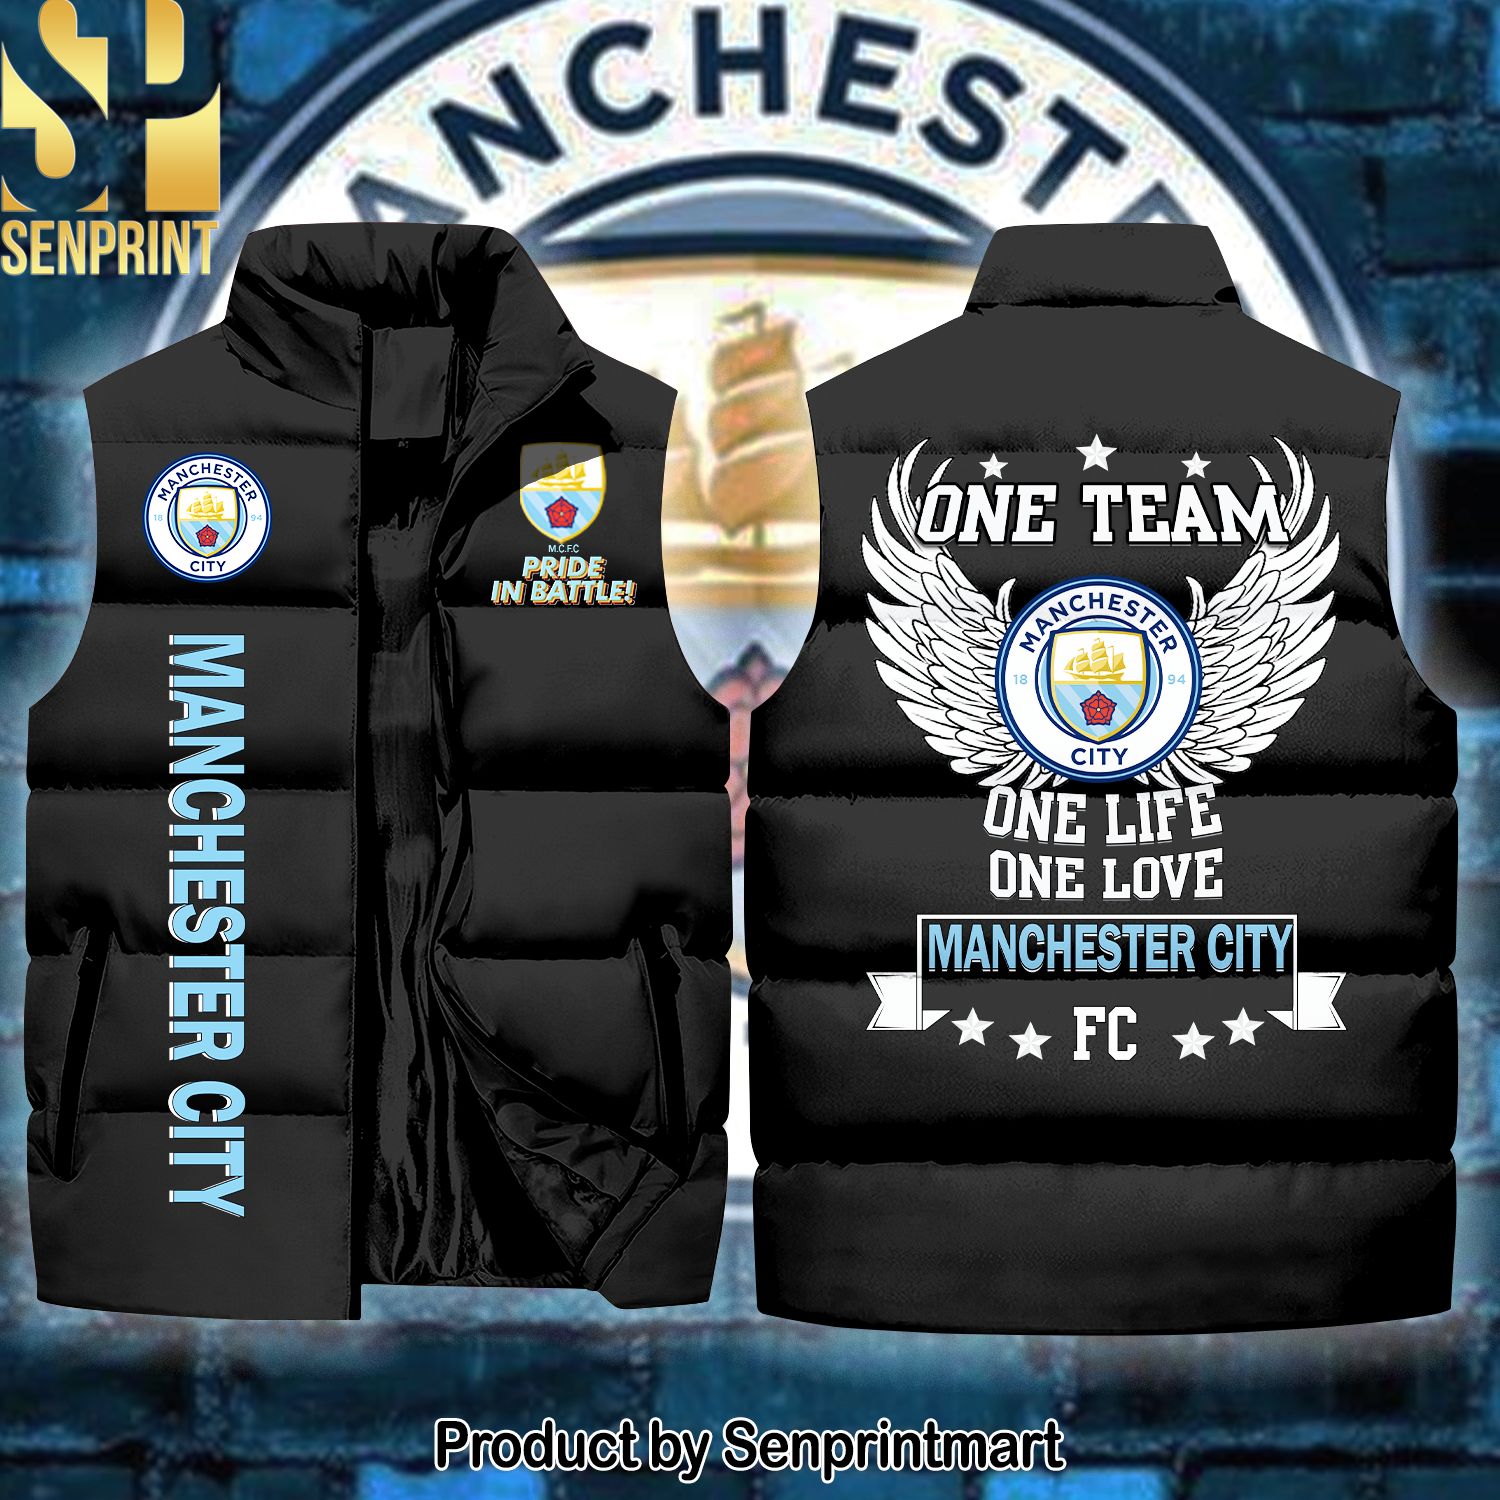 English Premier League Manchester City New Outfit Sleeveless Jacket